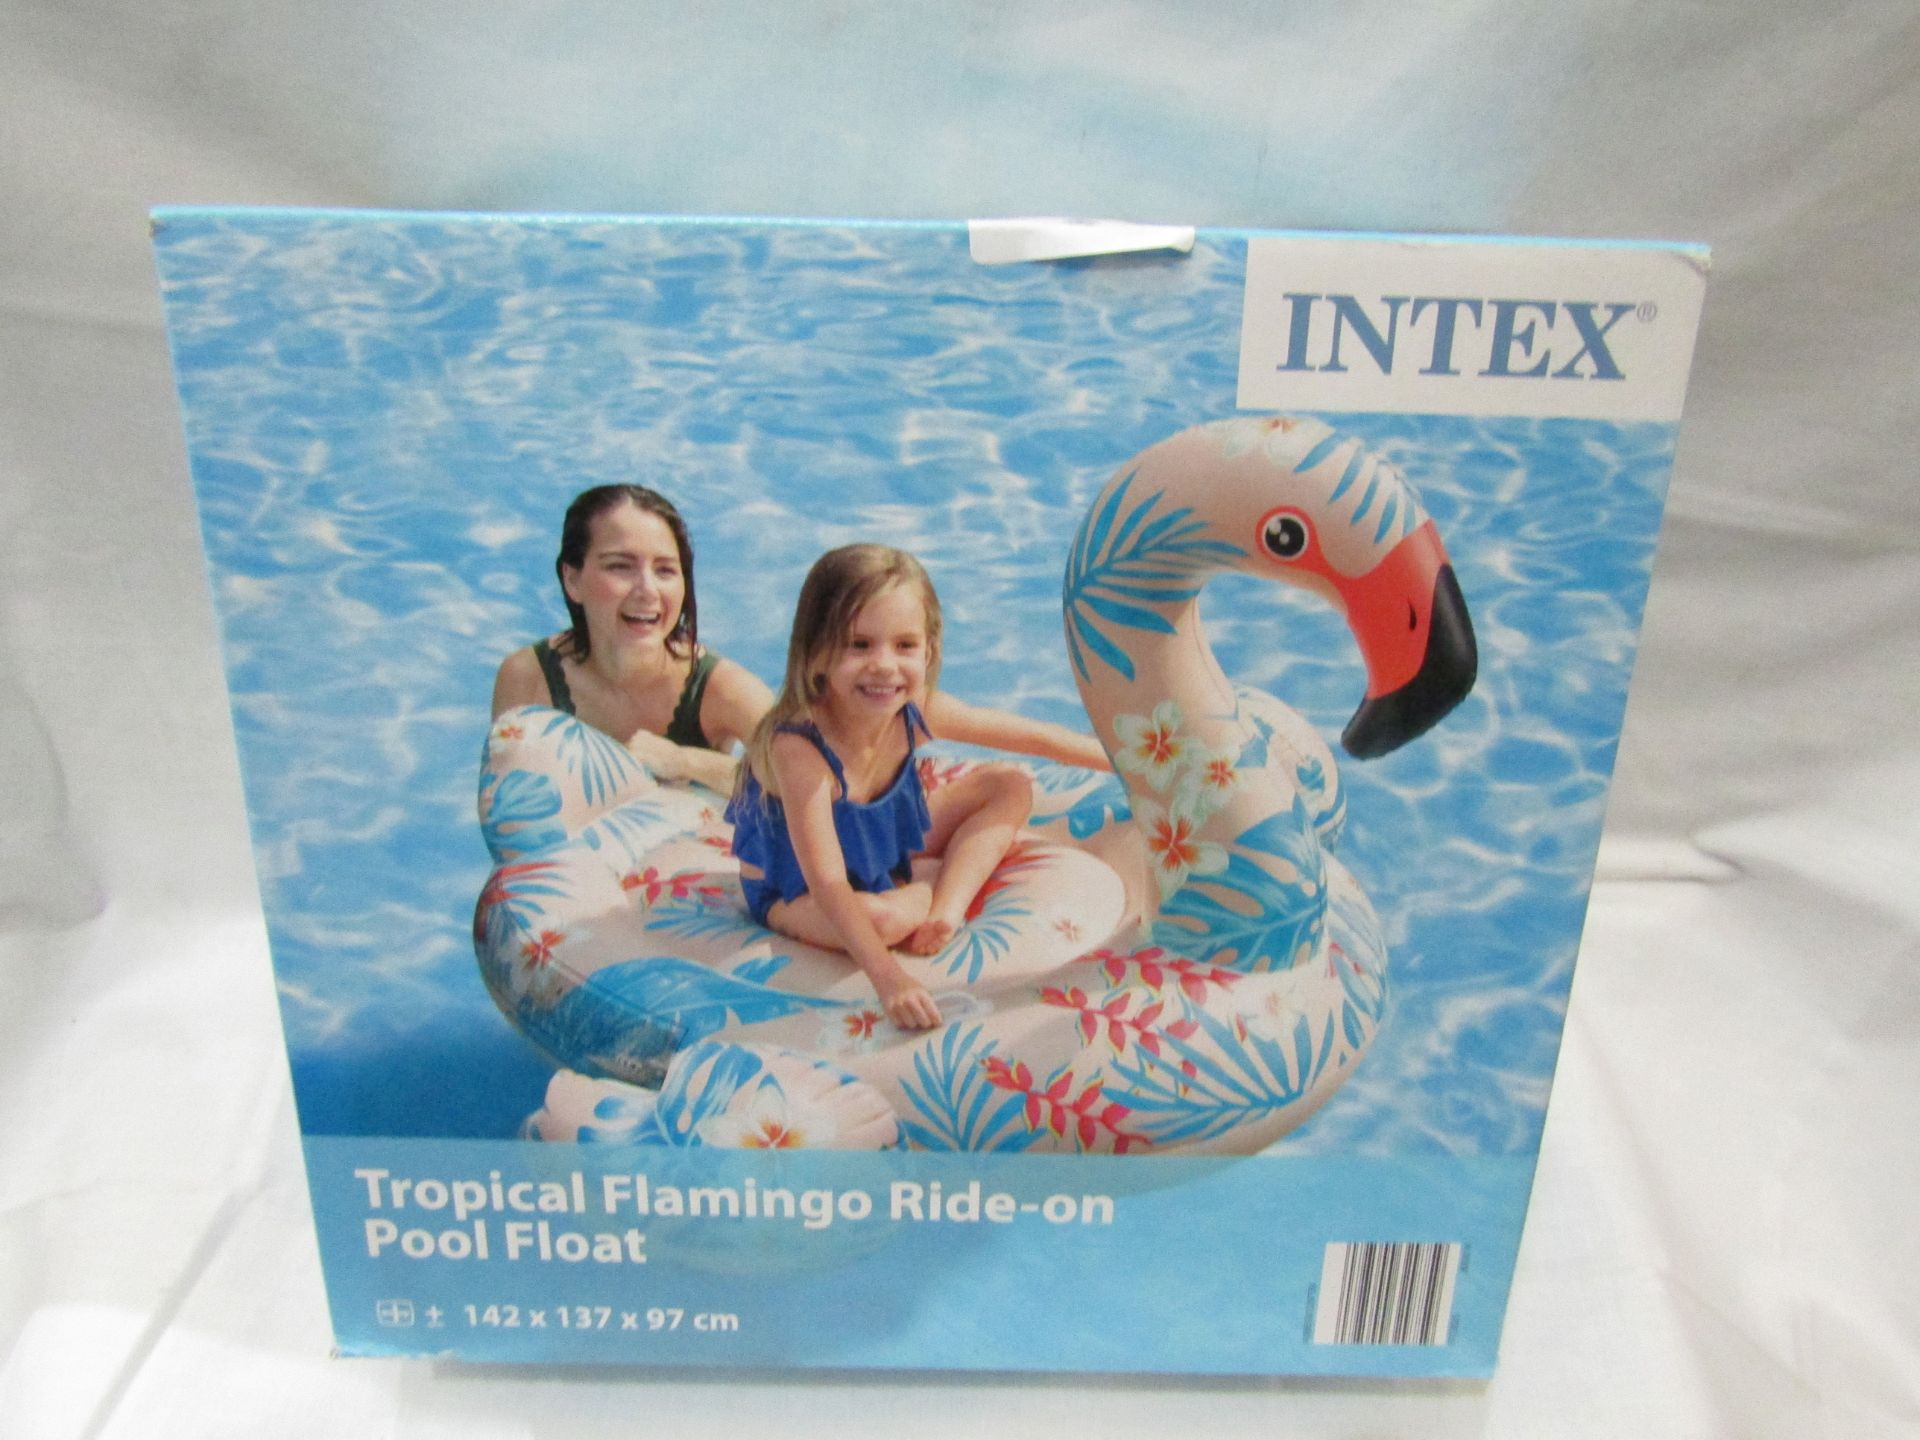 Intex Tropical Flamingo Ride-On Pool Float 142 X 137 X97 CM Unchecked & Boxed